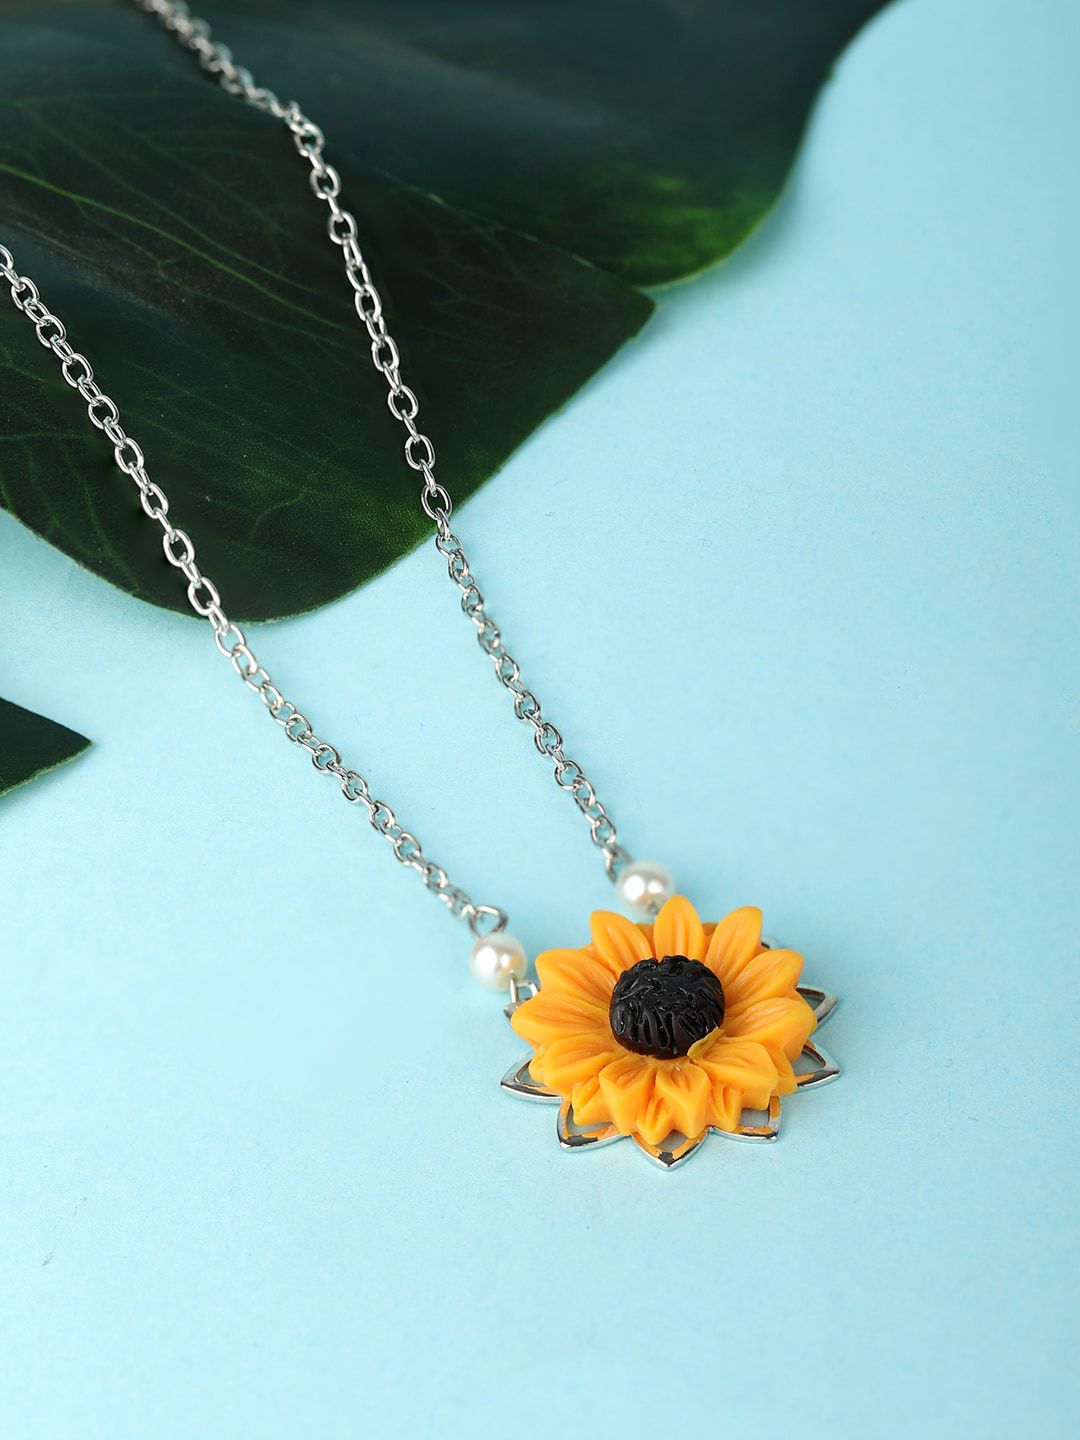 Priyaasi Silver-Plated & Yellow Sunflower Necklace Price in India